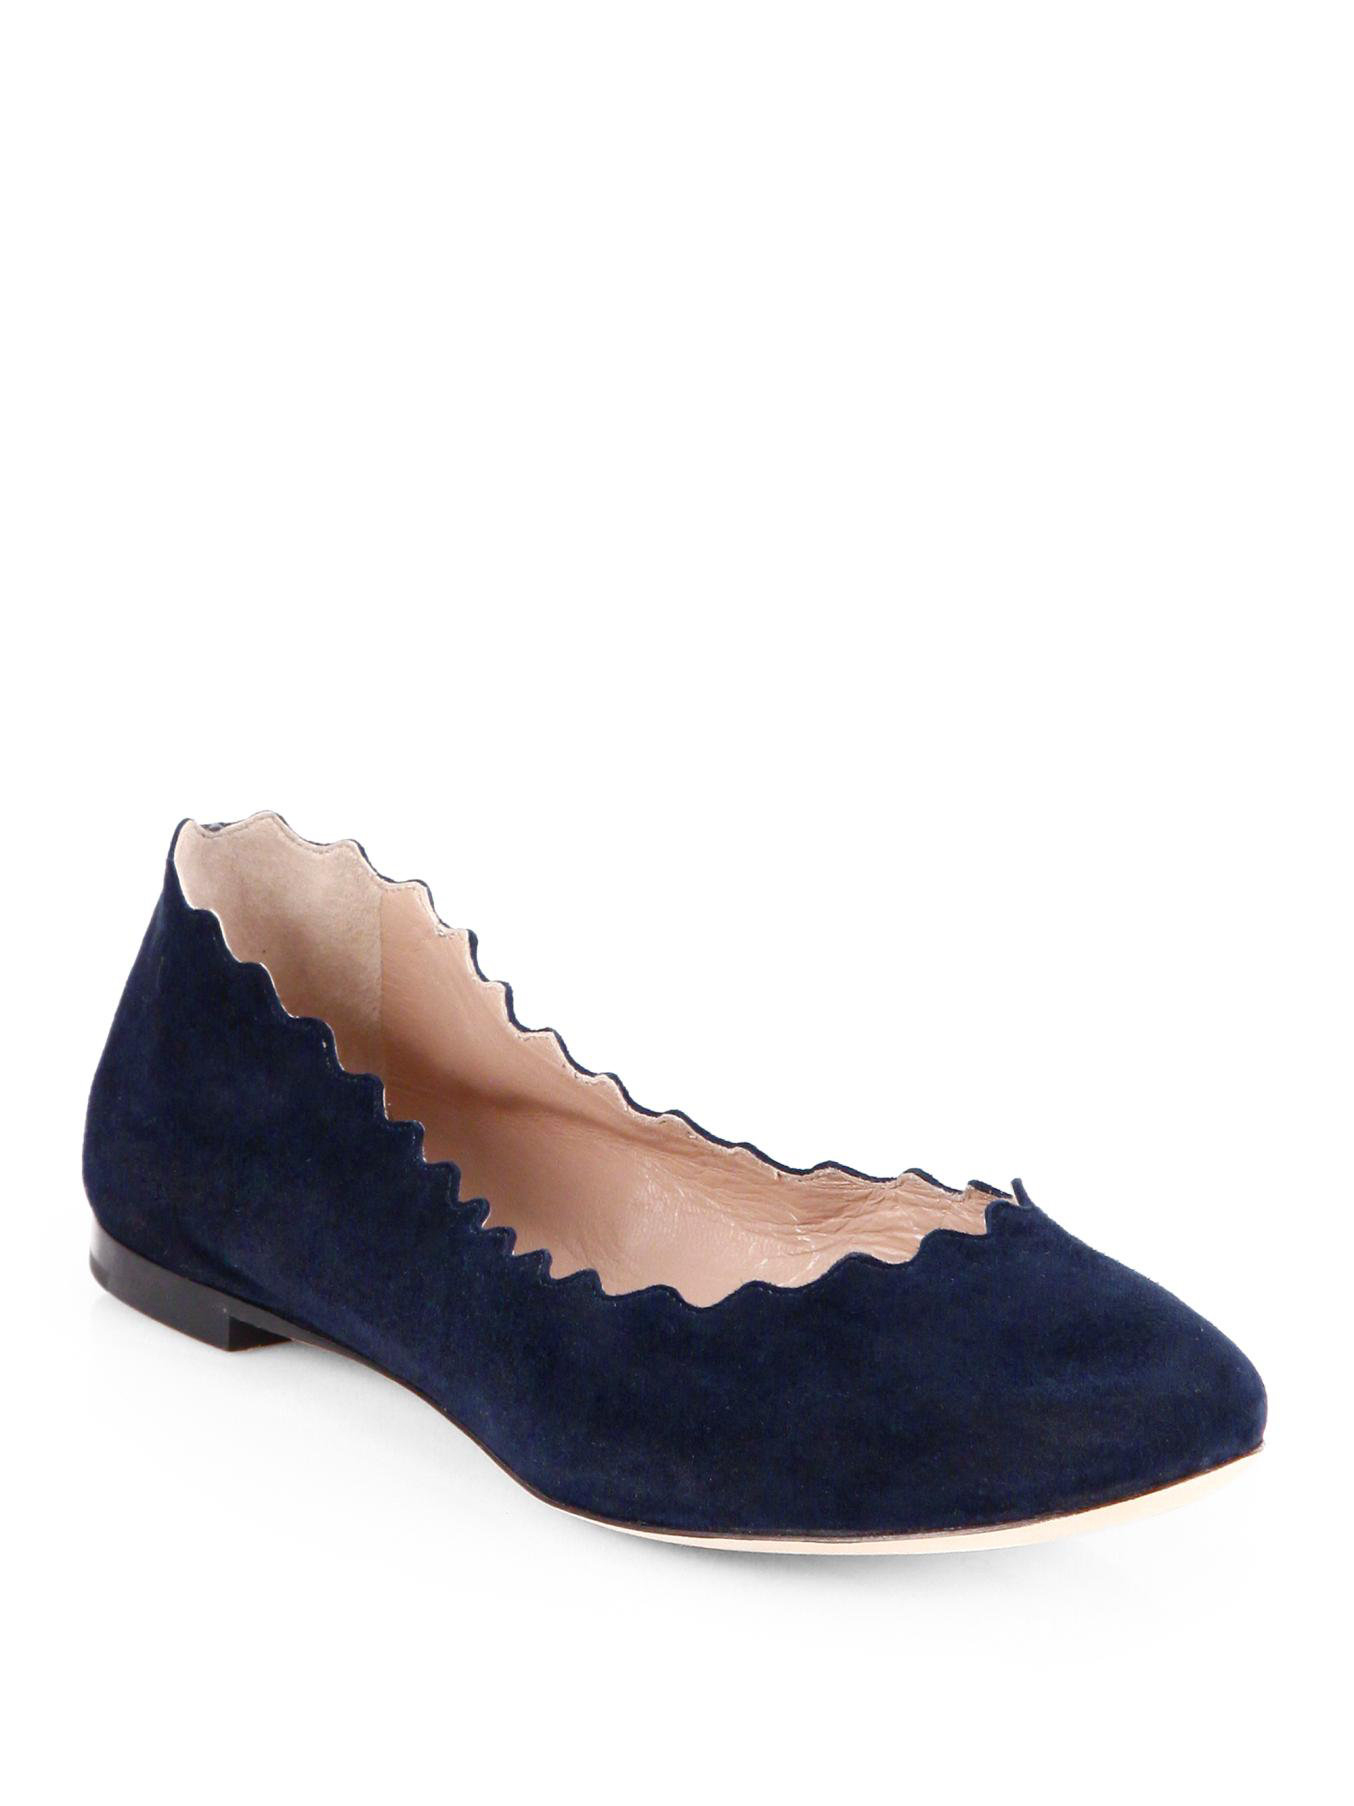 Chloé Suede Scalloped Ballet Flats in Blue | Lyst